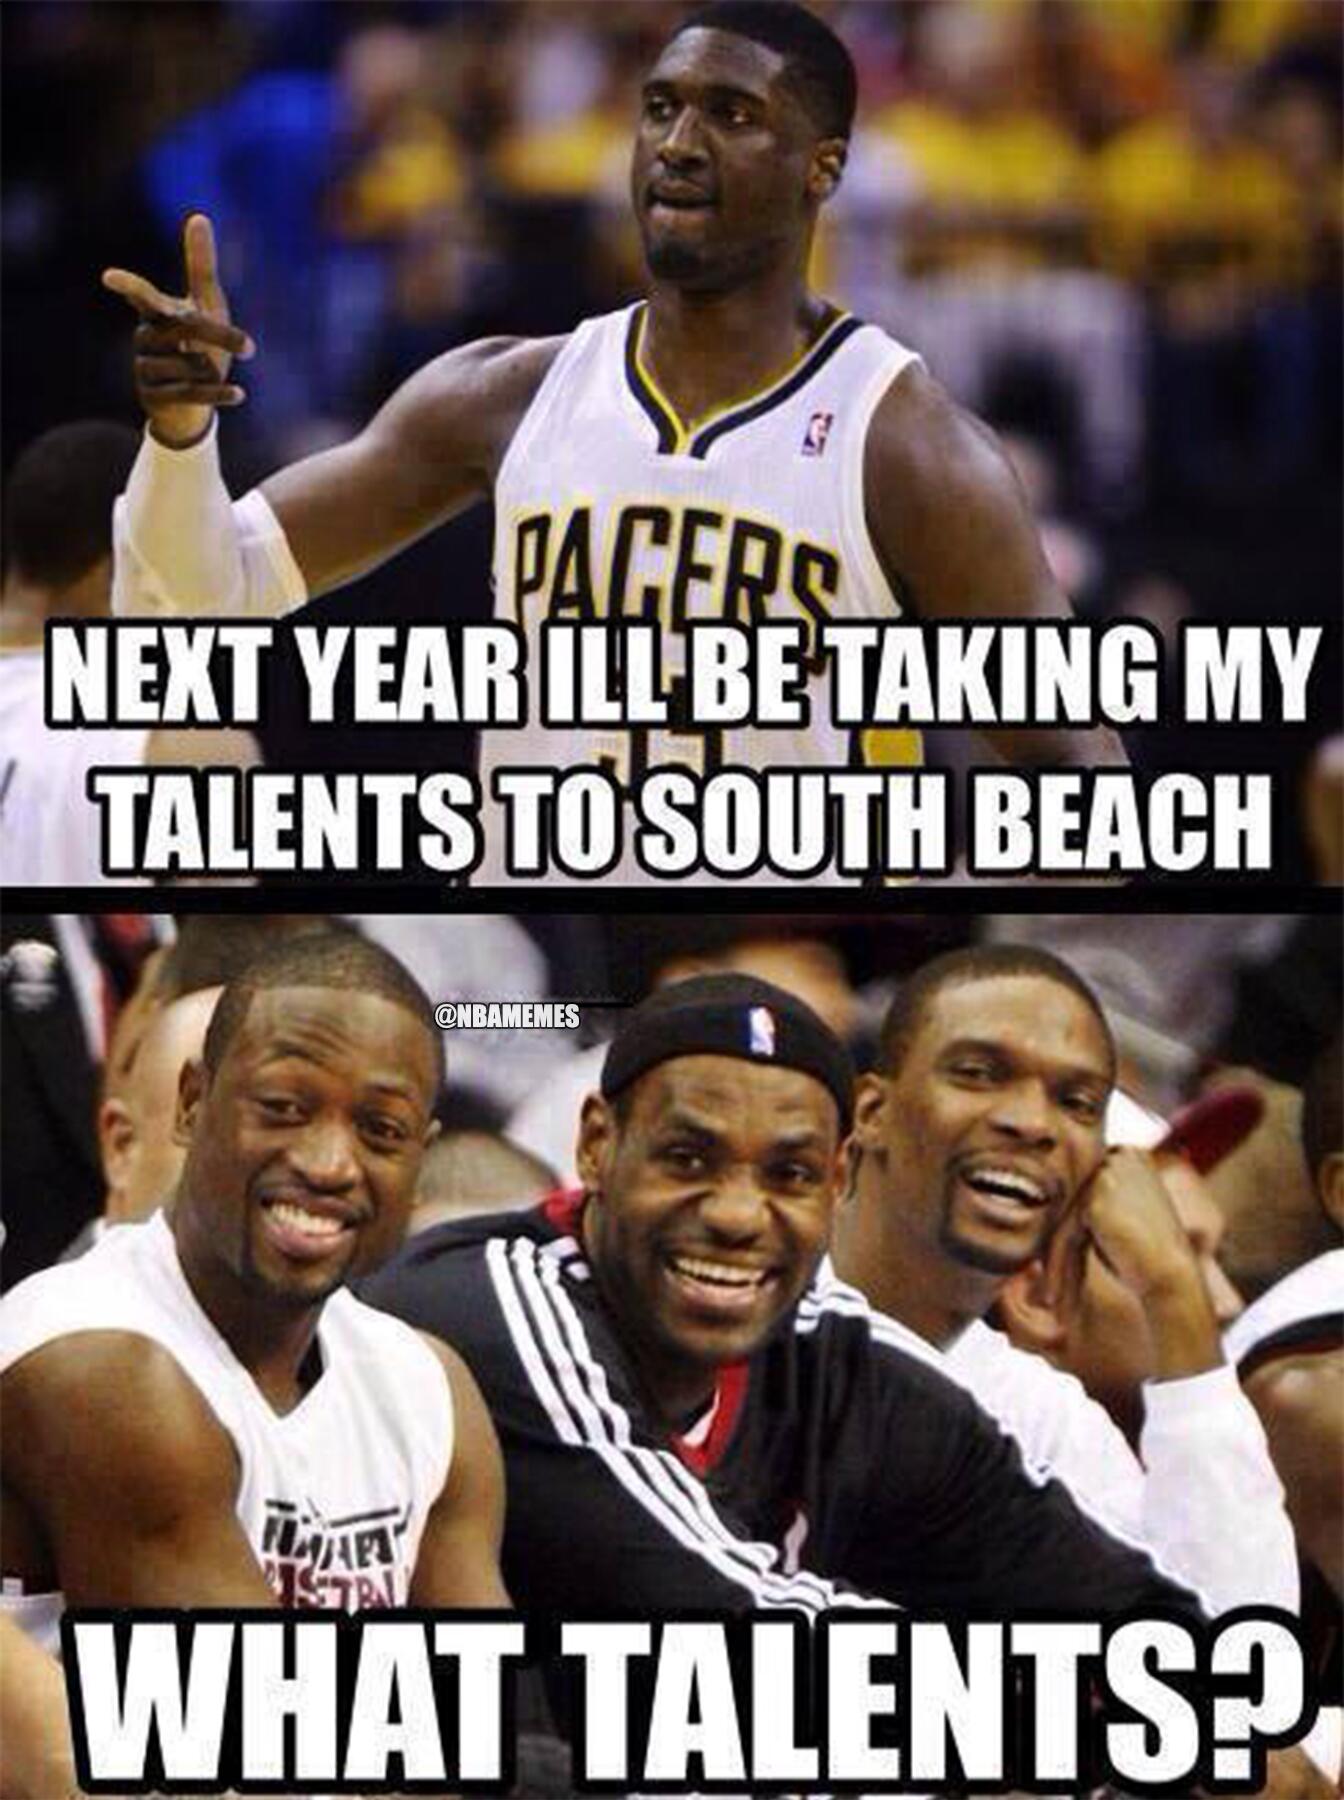 NBA Memes on Twitter: "We can only wonder what Roy Hibbert ...